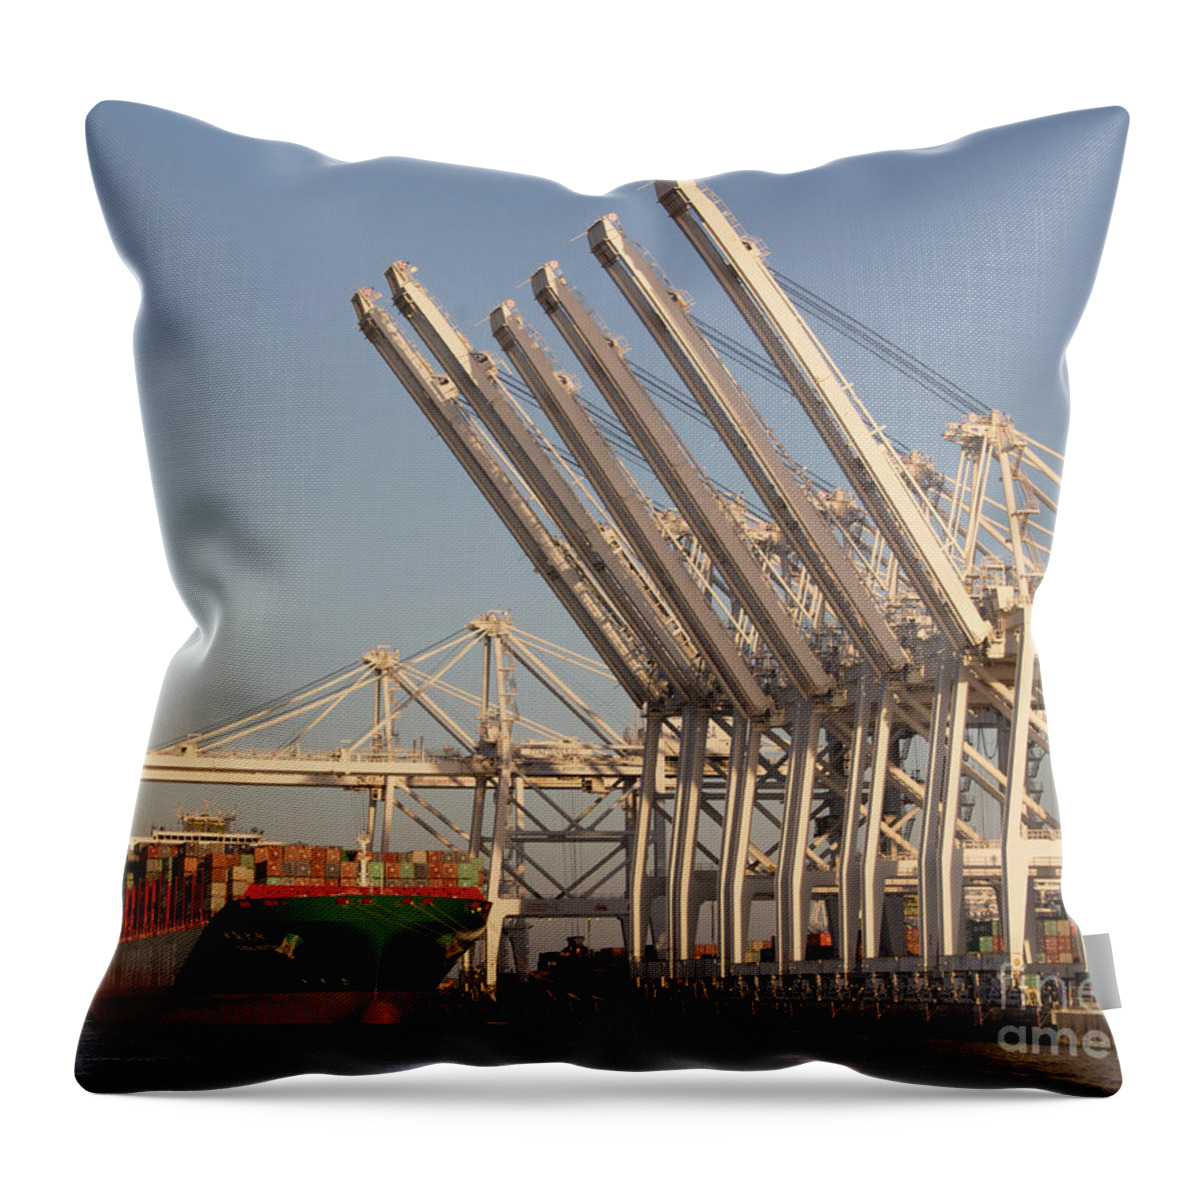 Cranes Throw Pillow featuring the photograph Cranes 6 by Cheryl Del Toro